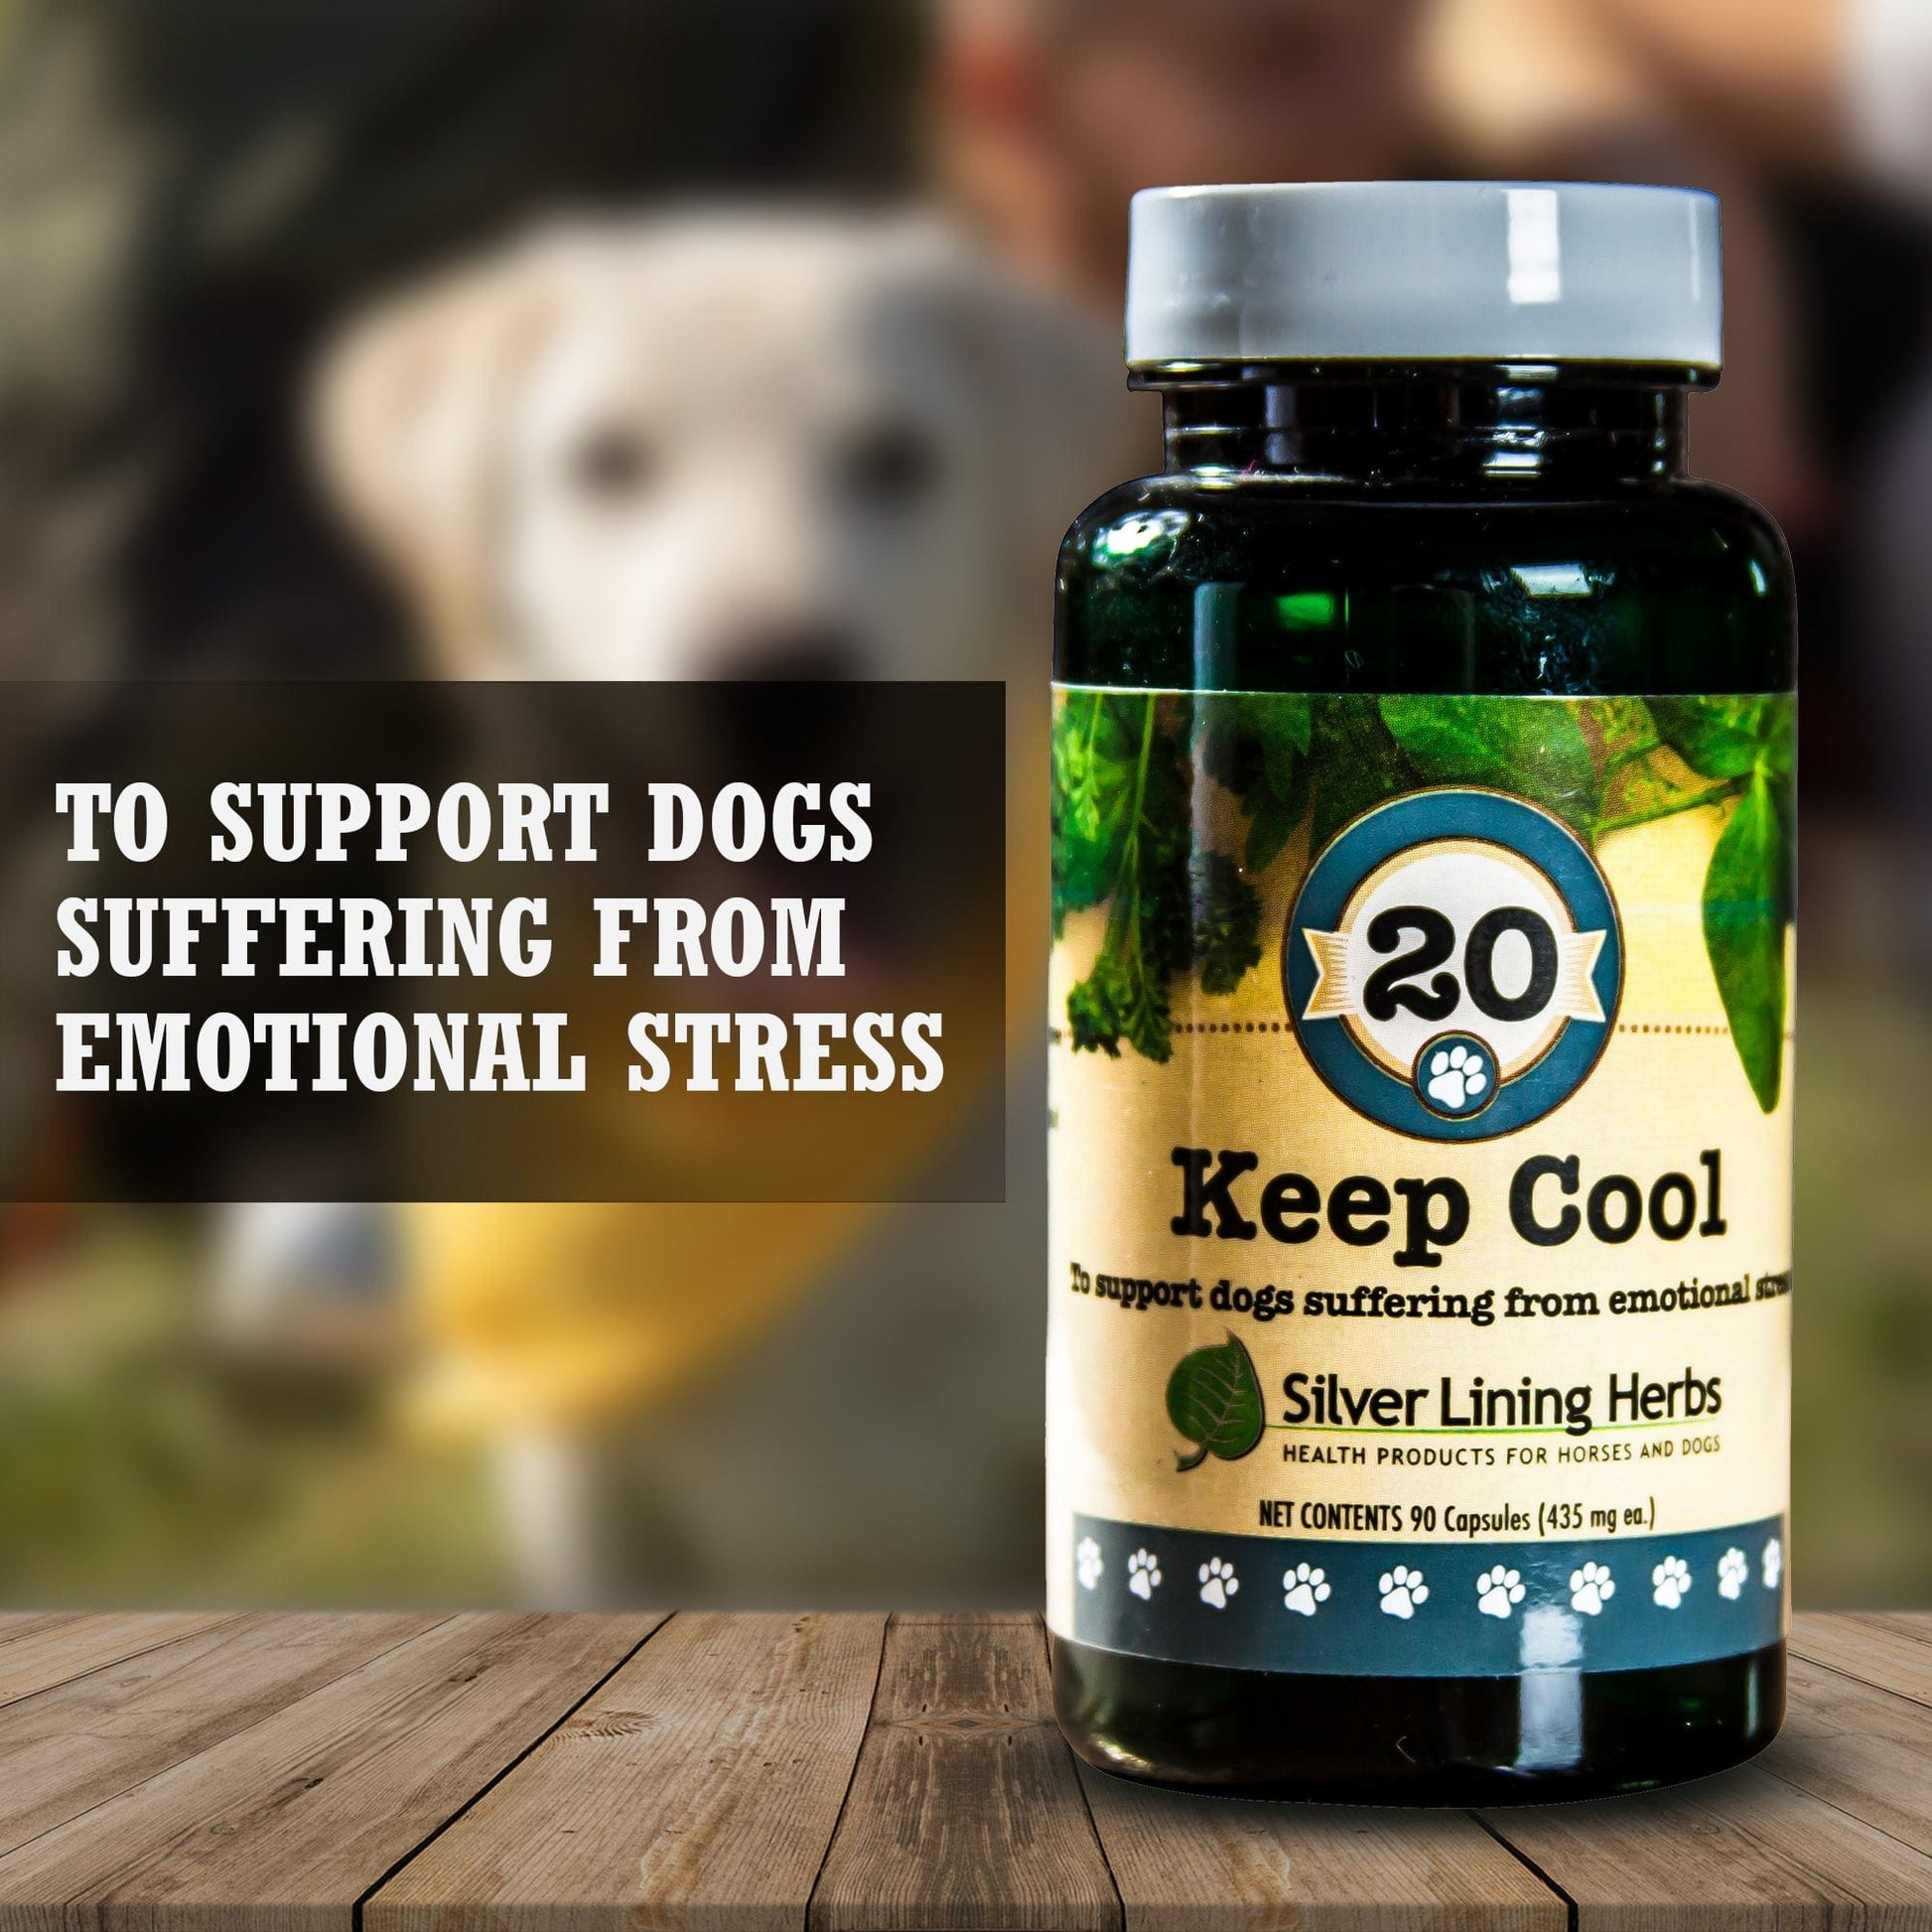 Keep Cool for Dogs - Silver Lining Herbs